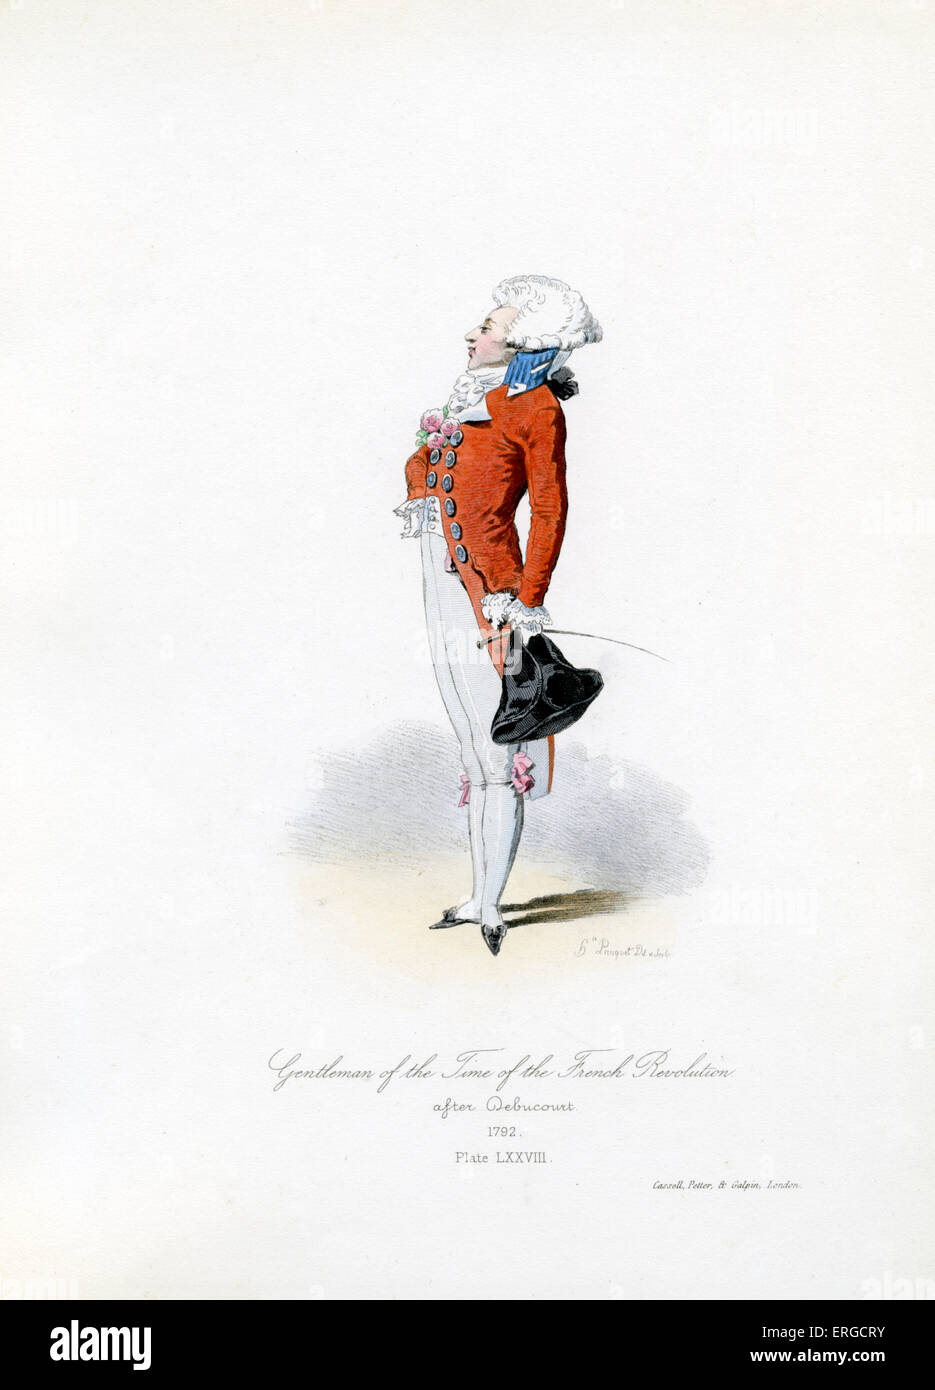 Gentleman of the time of the French Revolution, 1792 - from engraving by Hippolyte Pauquet after Debucourt. French Revolution: Stock Photo